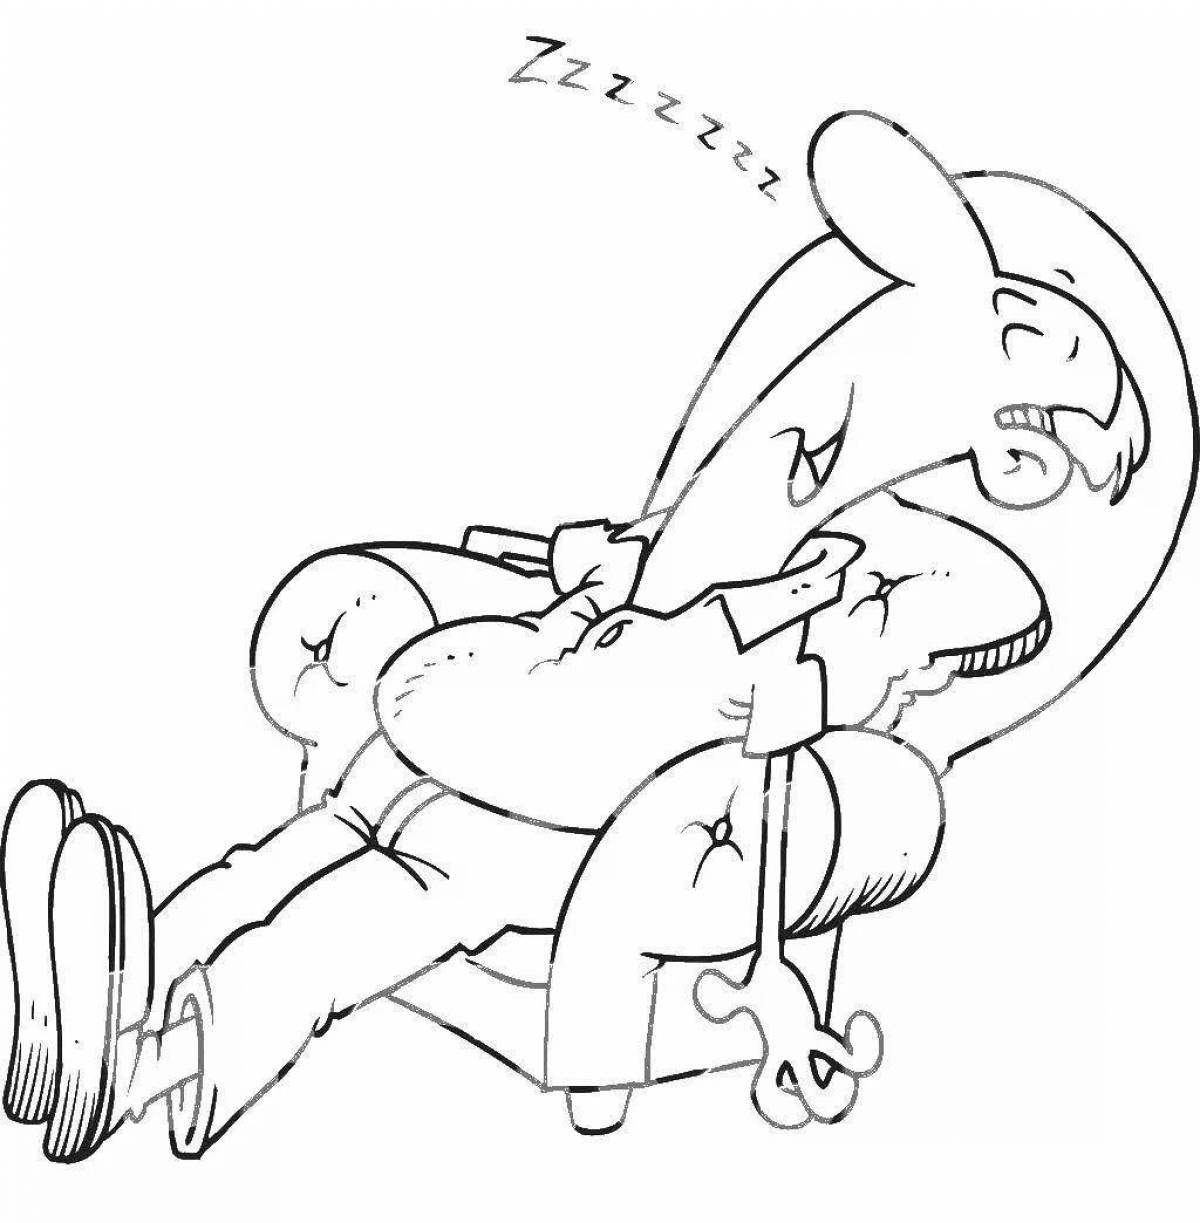 Raised exhausted good man coloring page